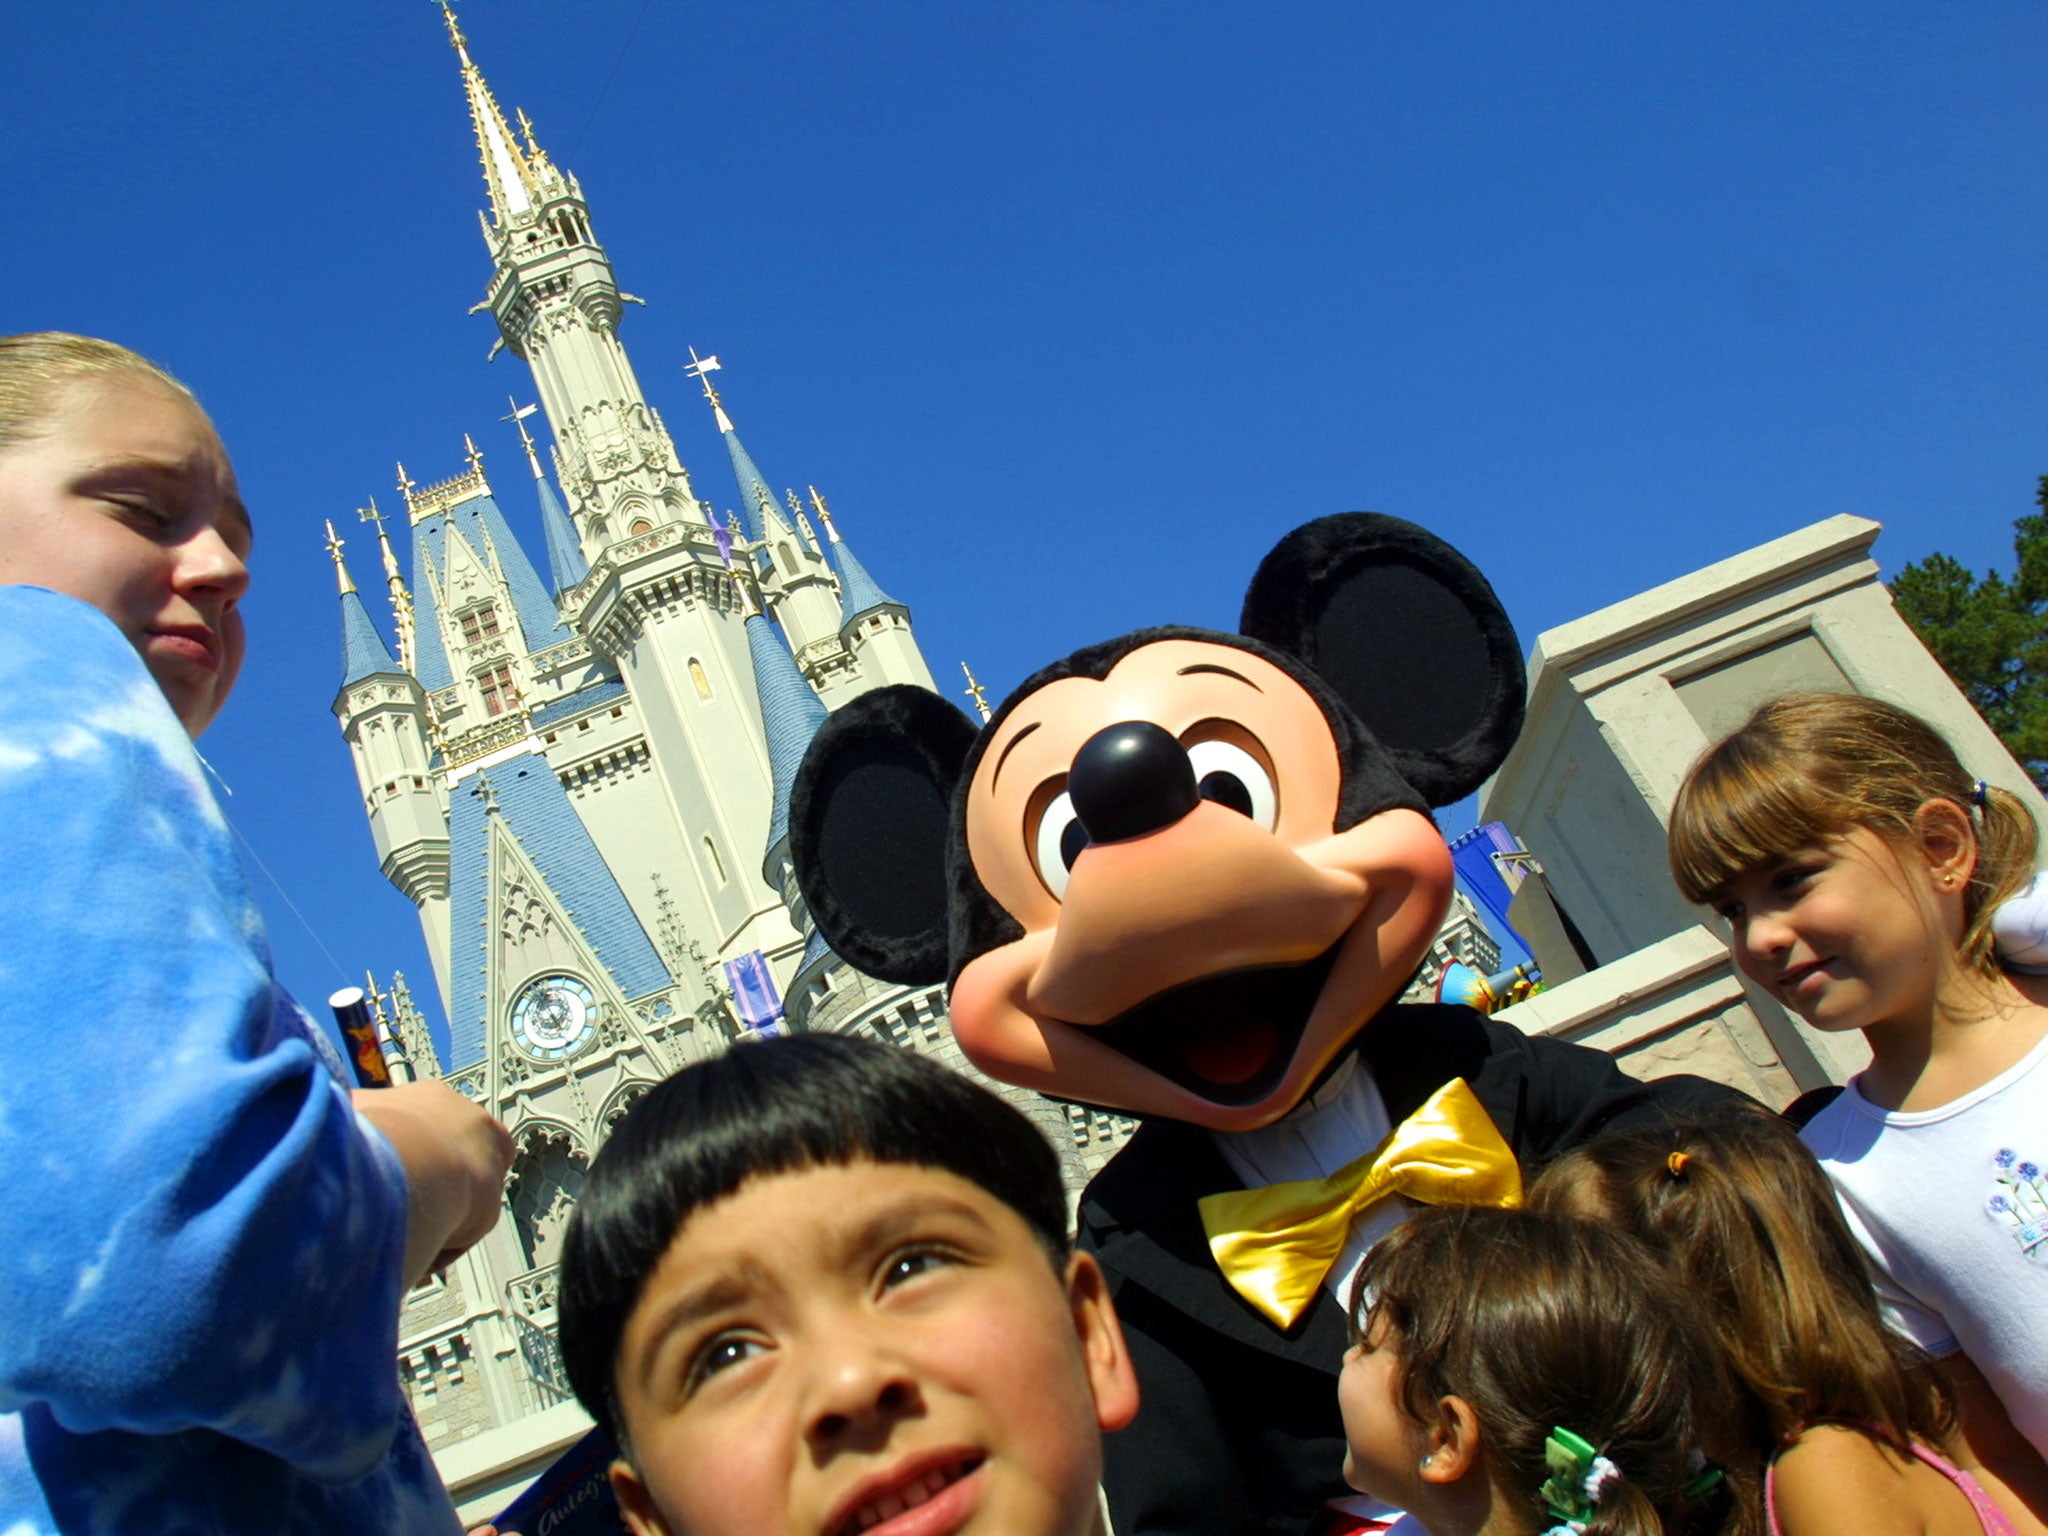 Mickey Mouse greets children in front of Cinderella's Castle at Magic Kingdom in  Florida - one of the US destinations that has seen a significant drop in flight searches